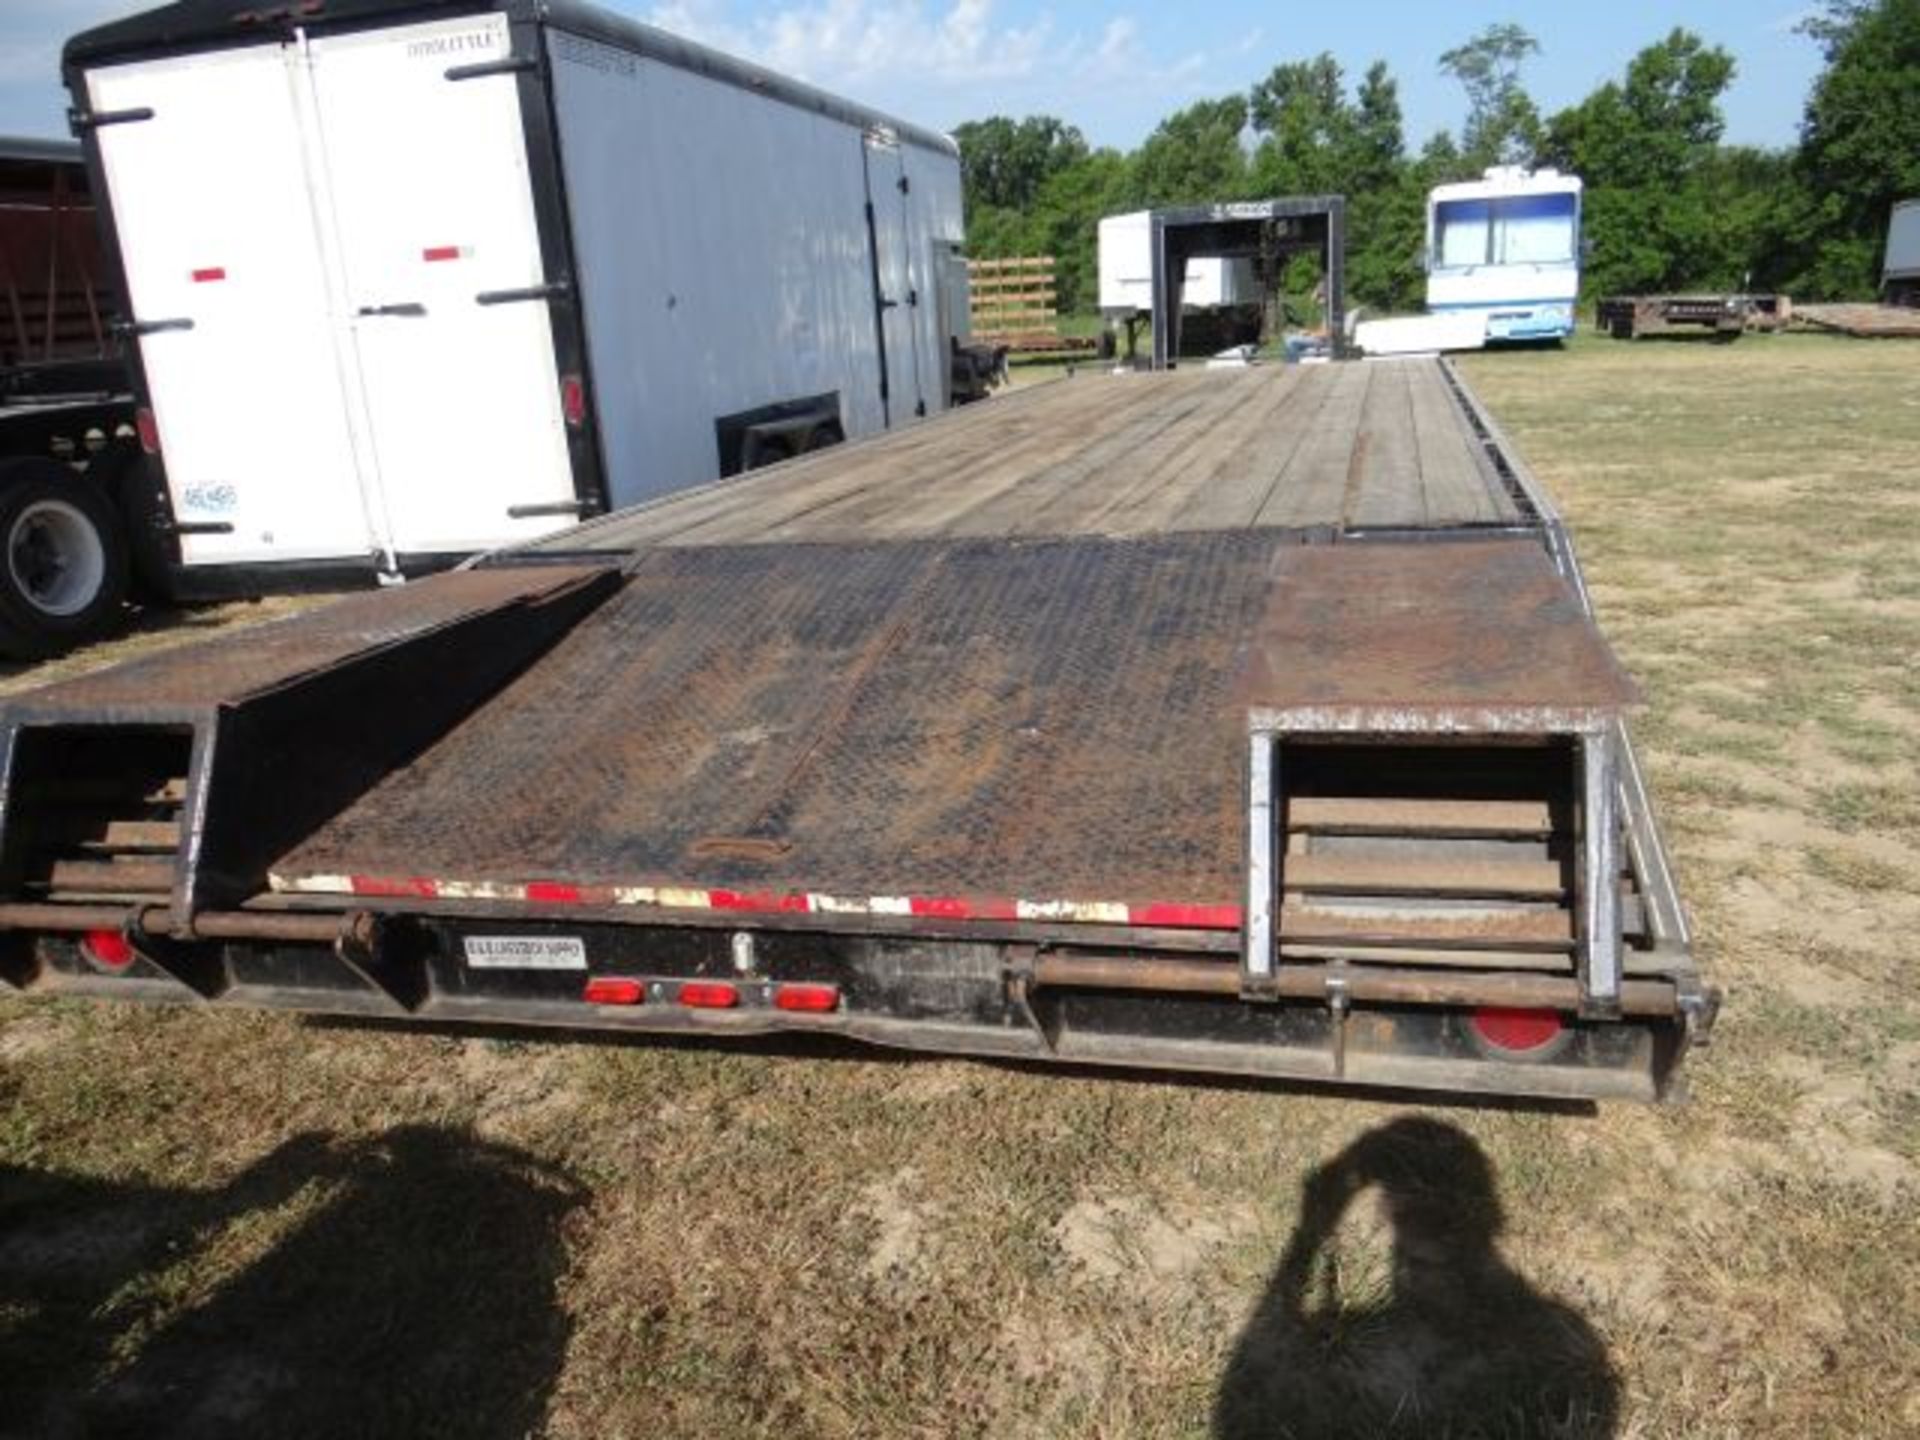 1999 Titan Flatbed Trailer 24' w/Dovetail, Gooseneck, Title in the Office - Image 3 of 3